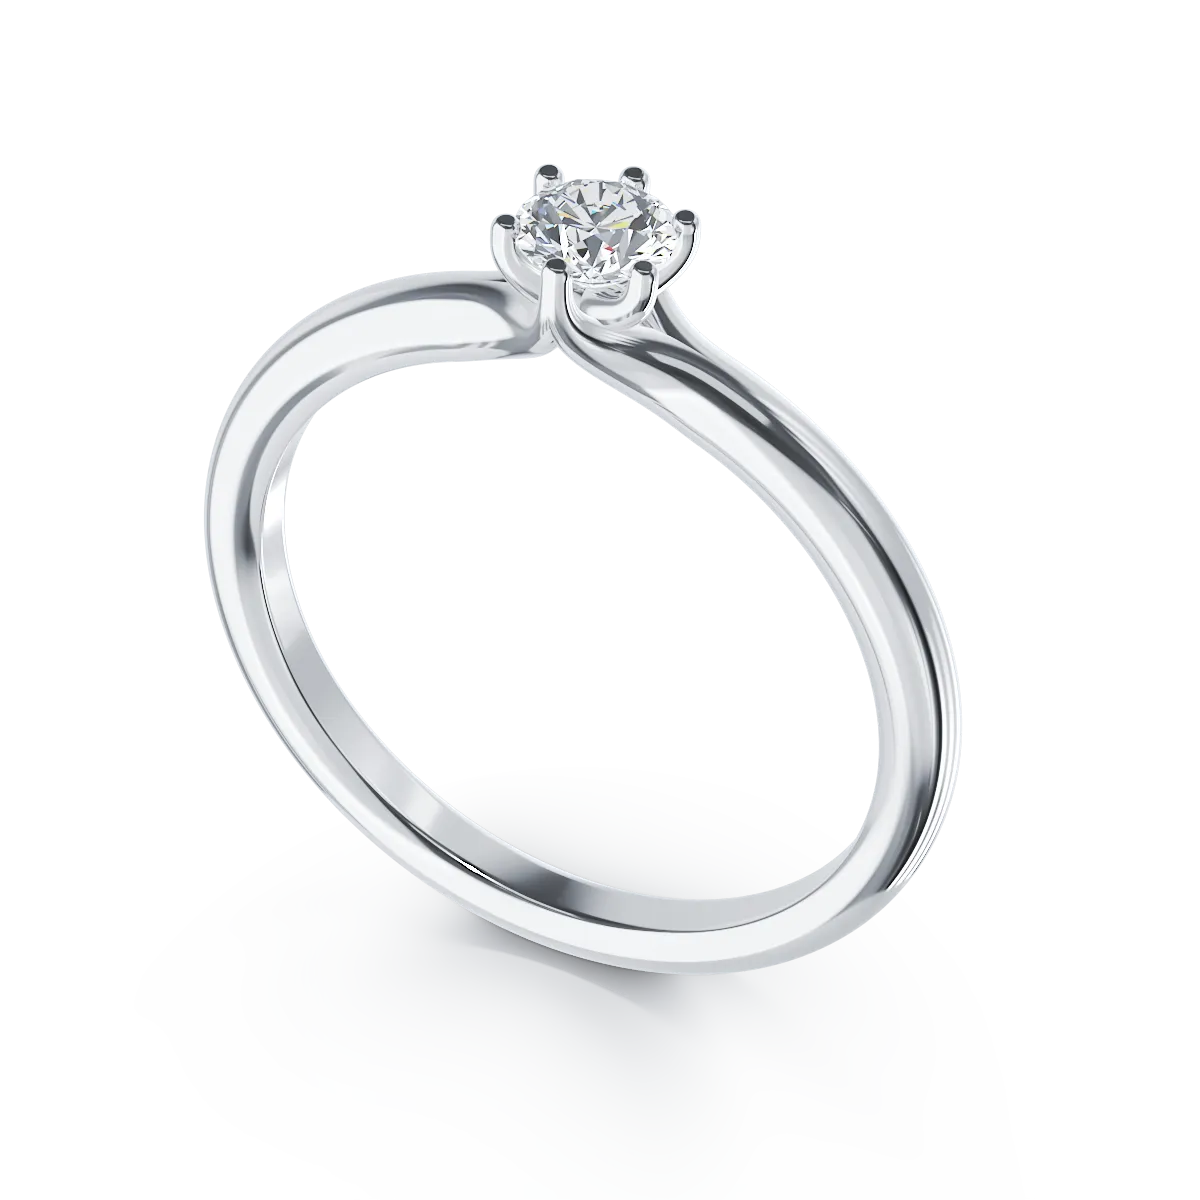 Platinum engagement ring with 0.205ct solitaire diamond